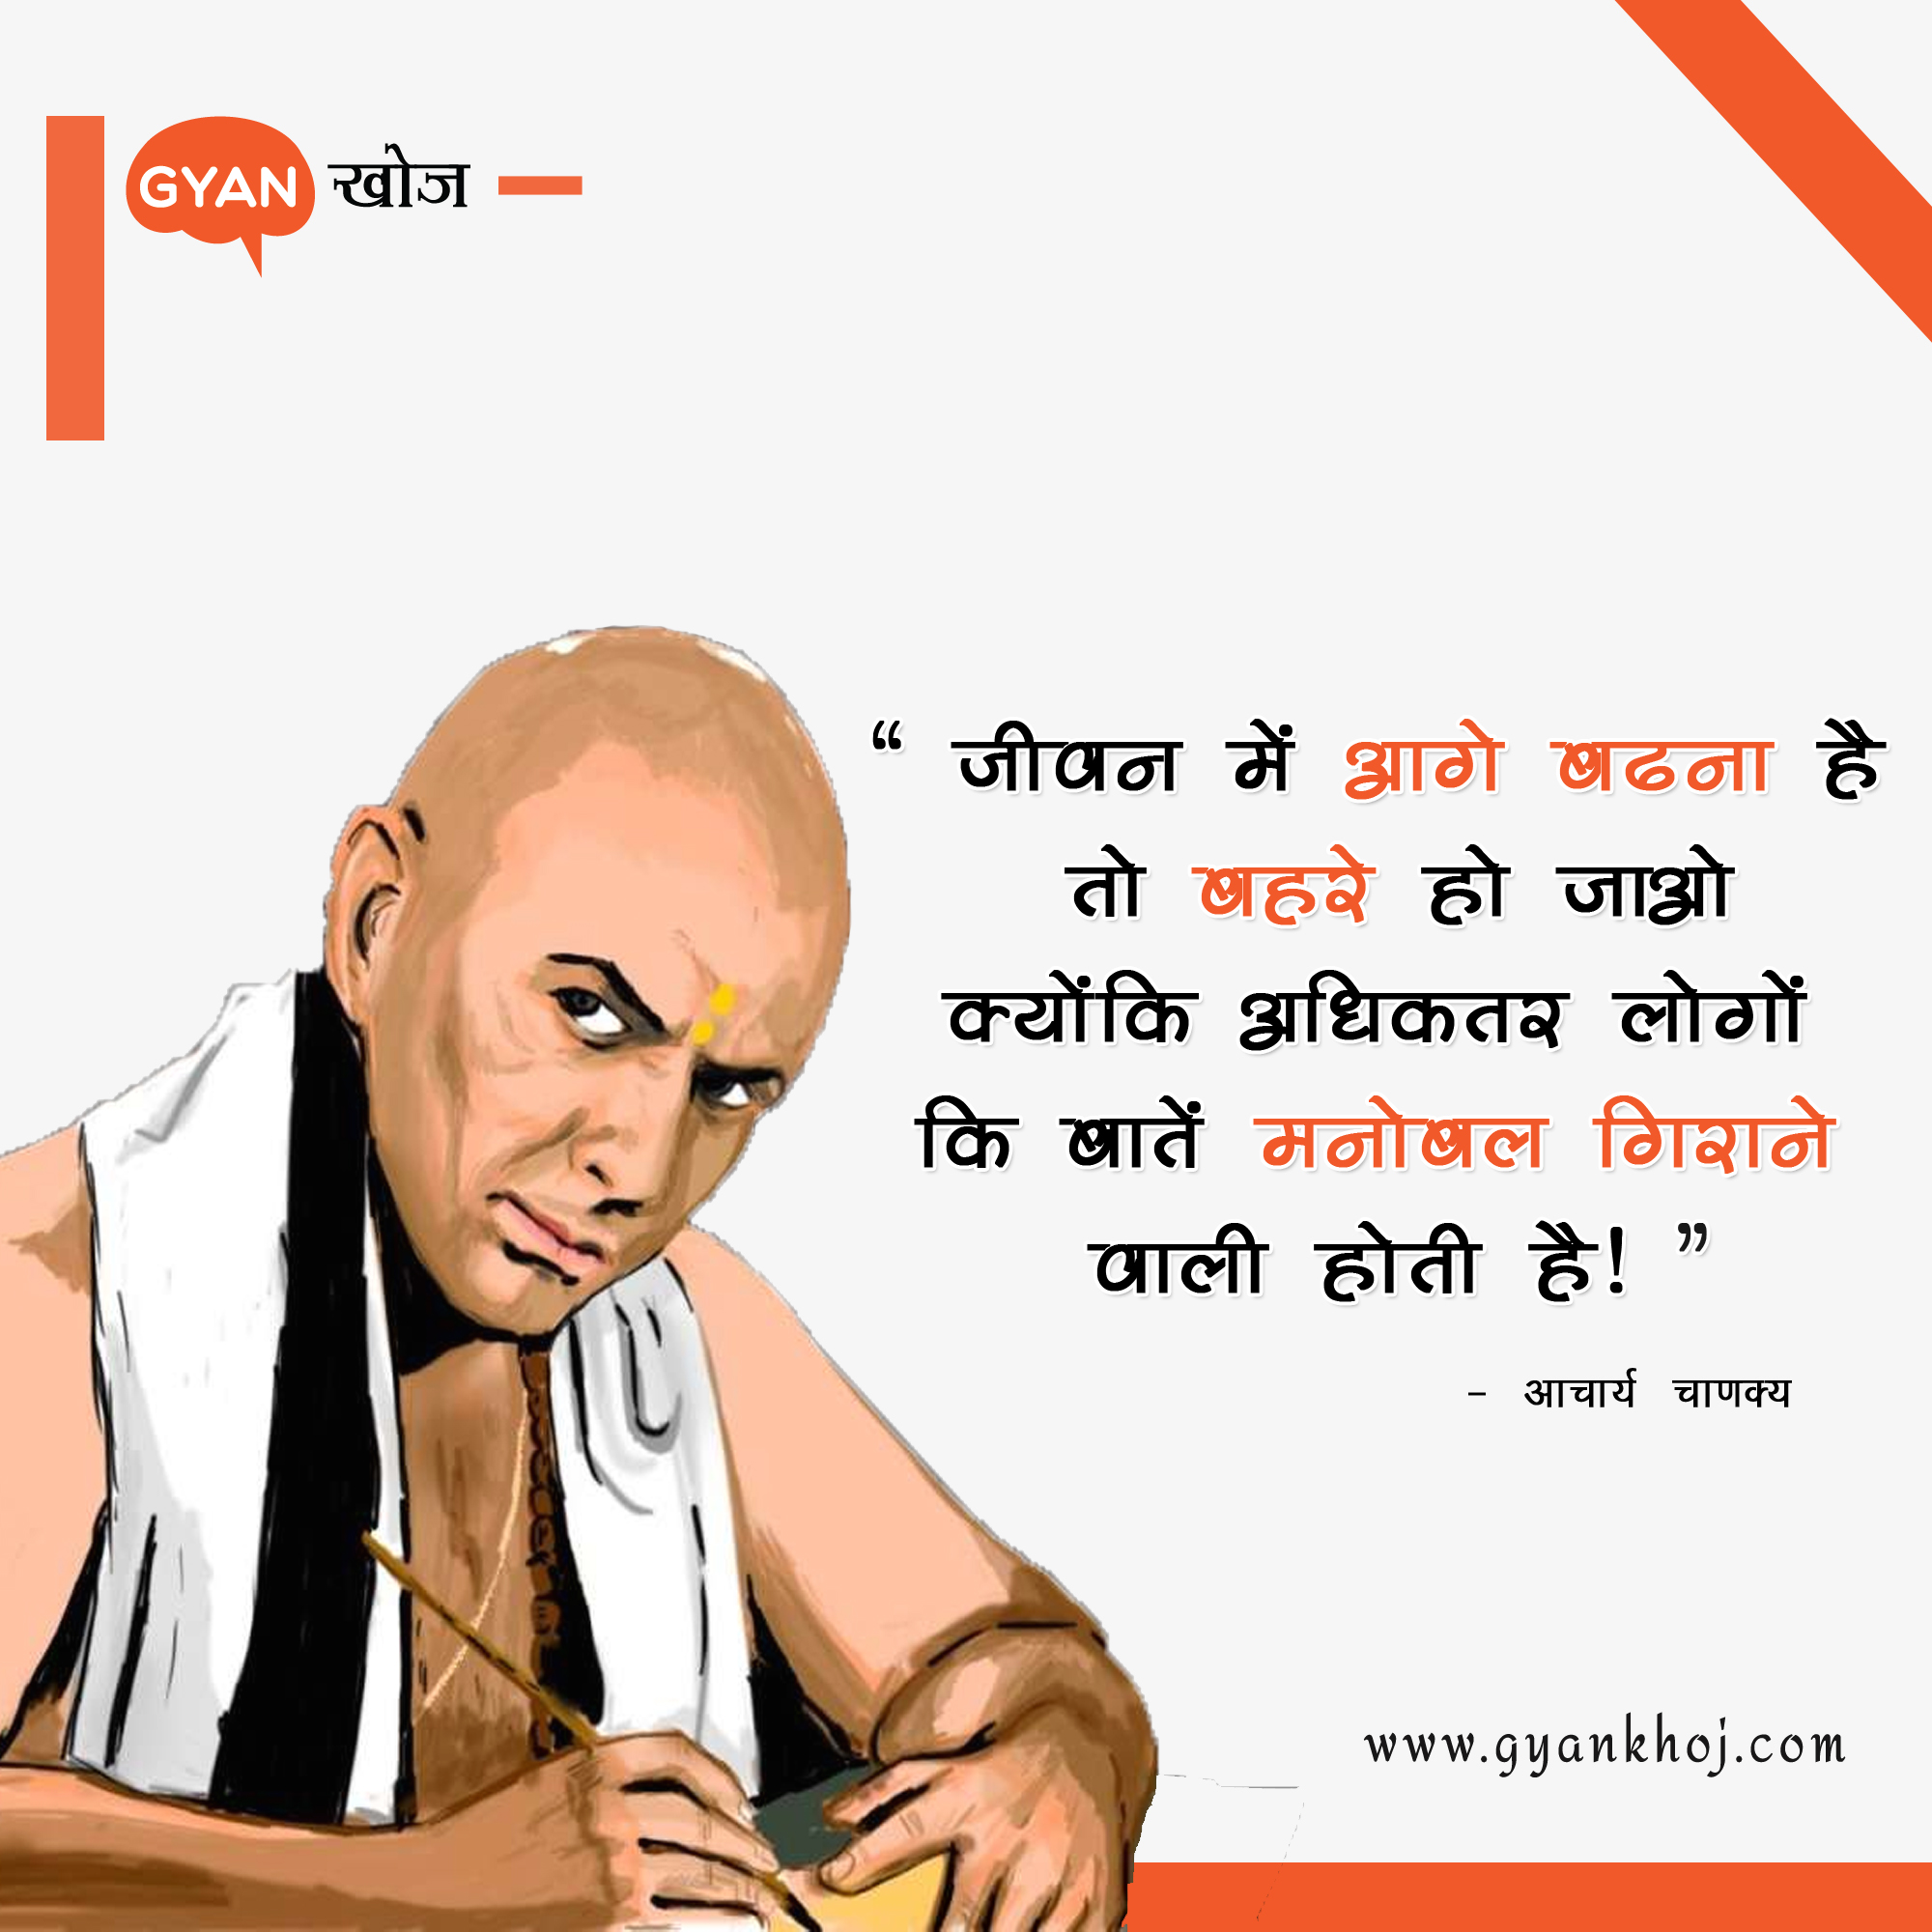 Motivational Quotes In Hindi With Images